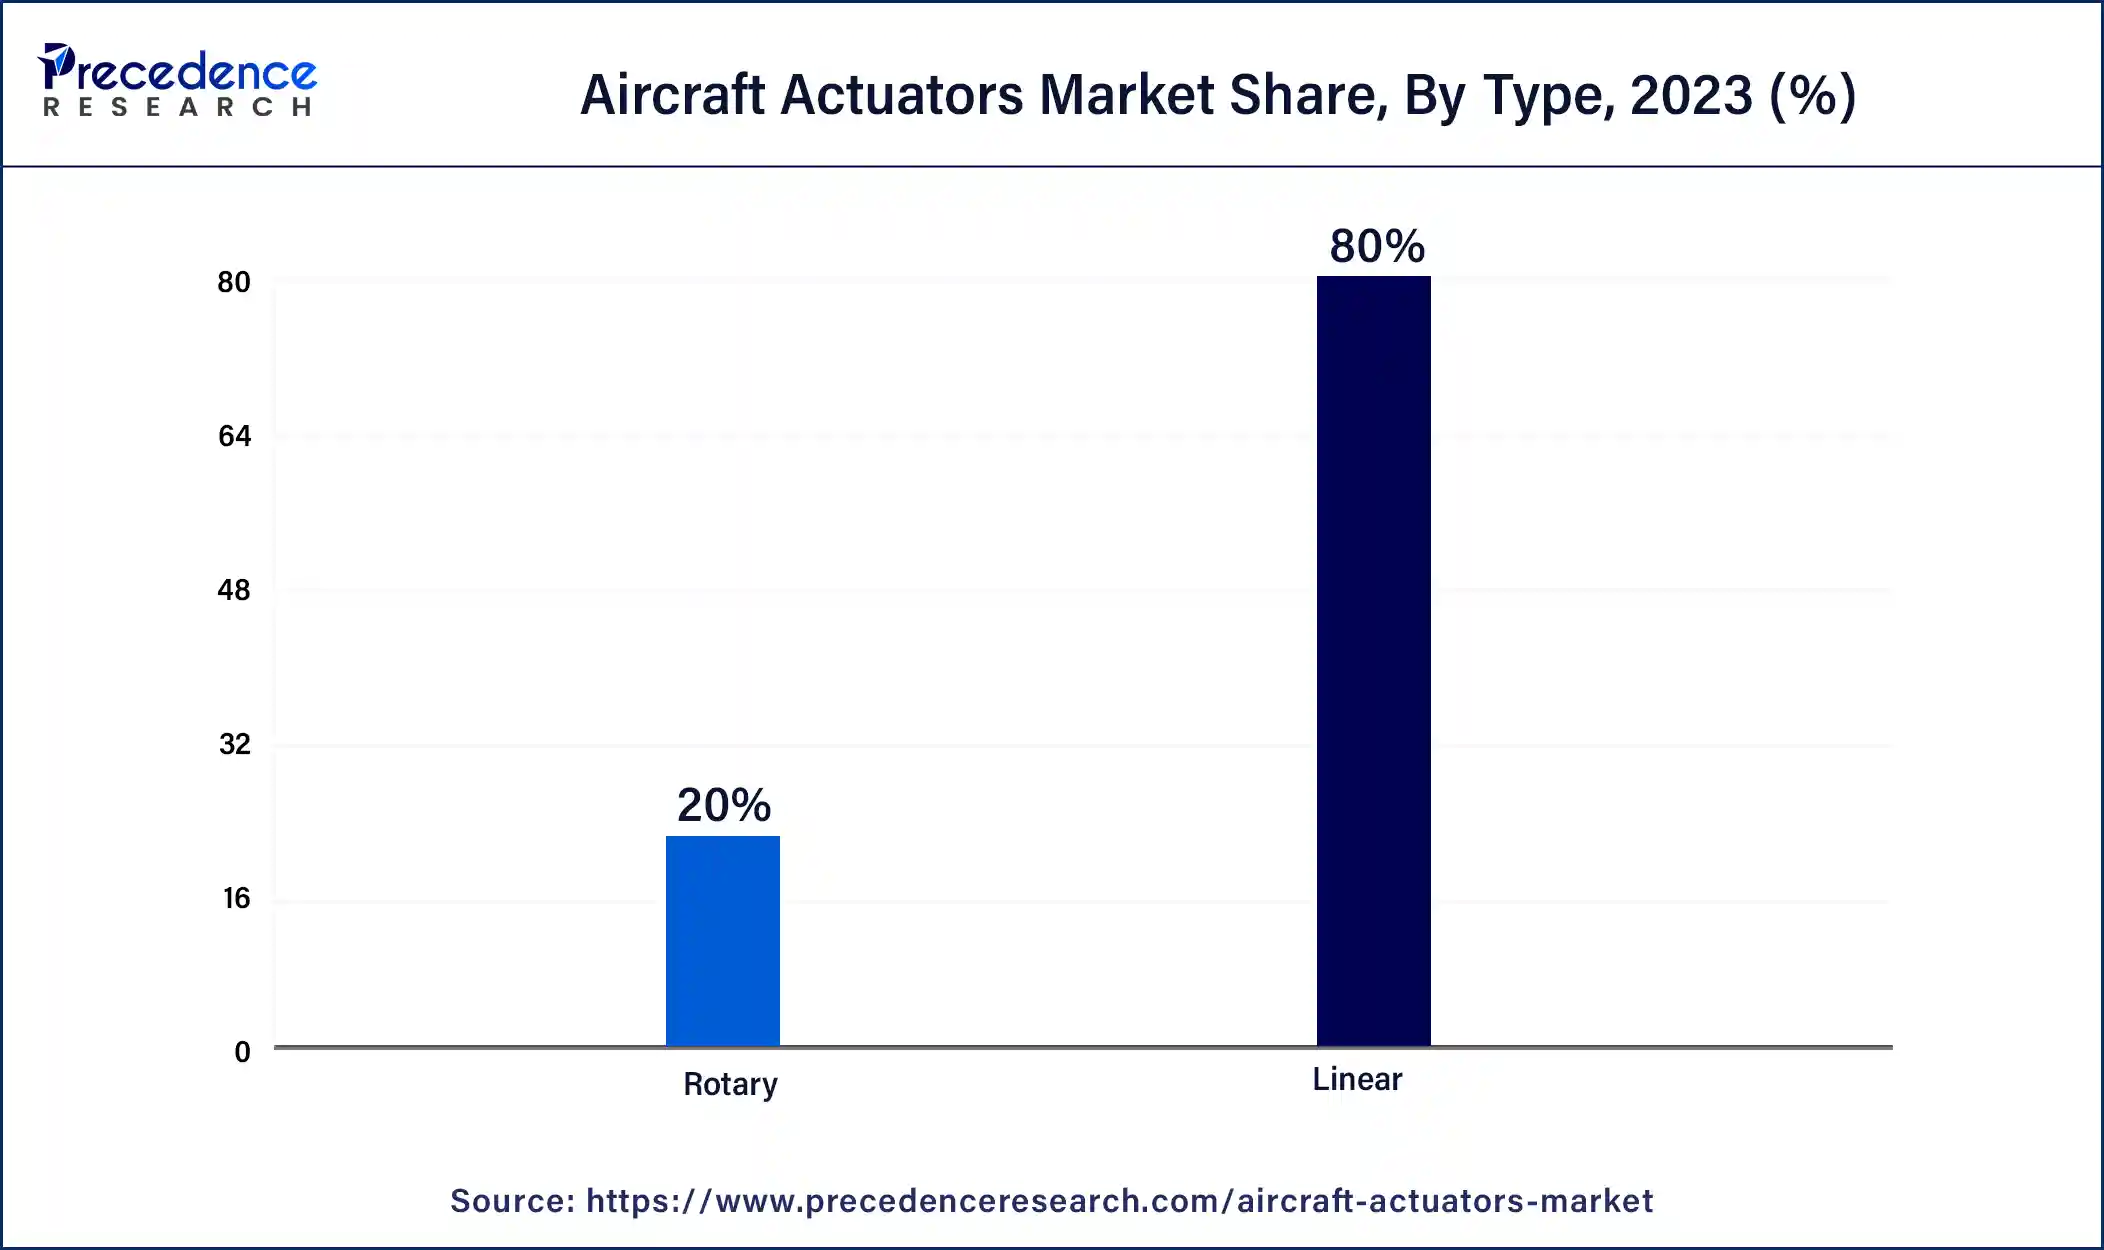 Aircraft Actuators Market Share, By Type, 2023 (%)